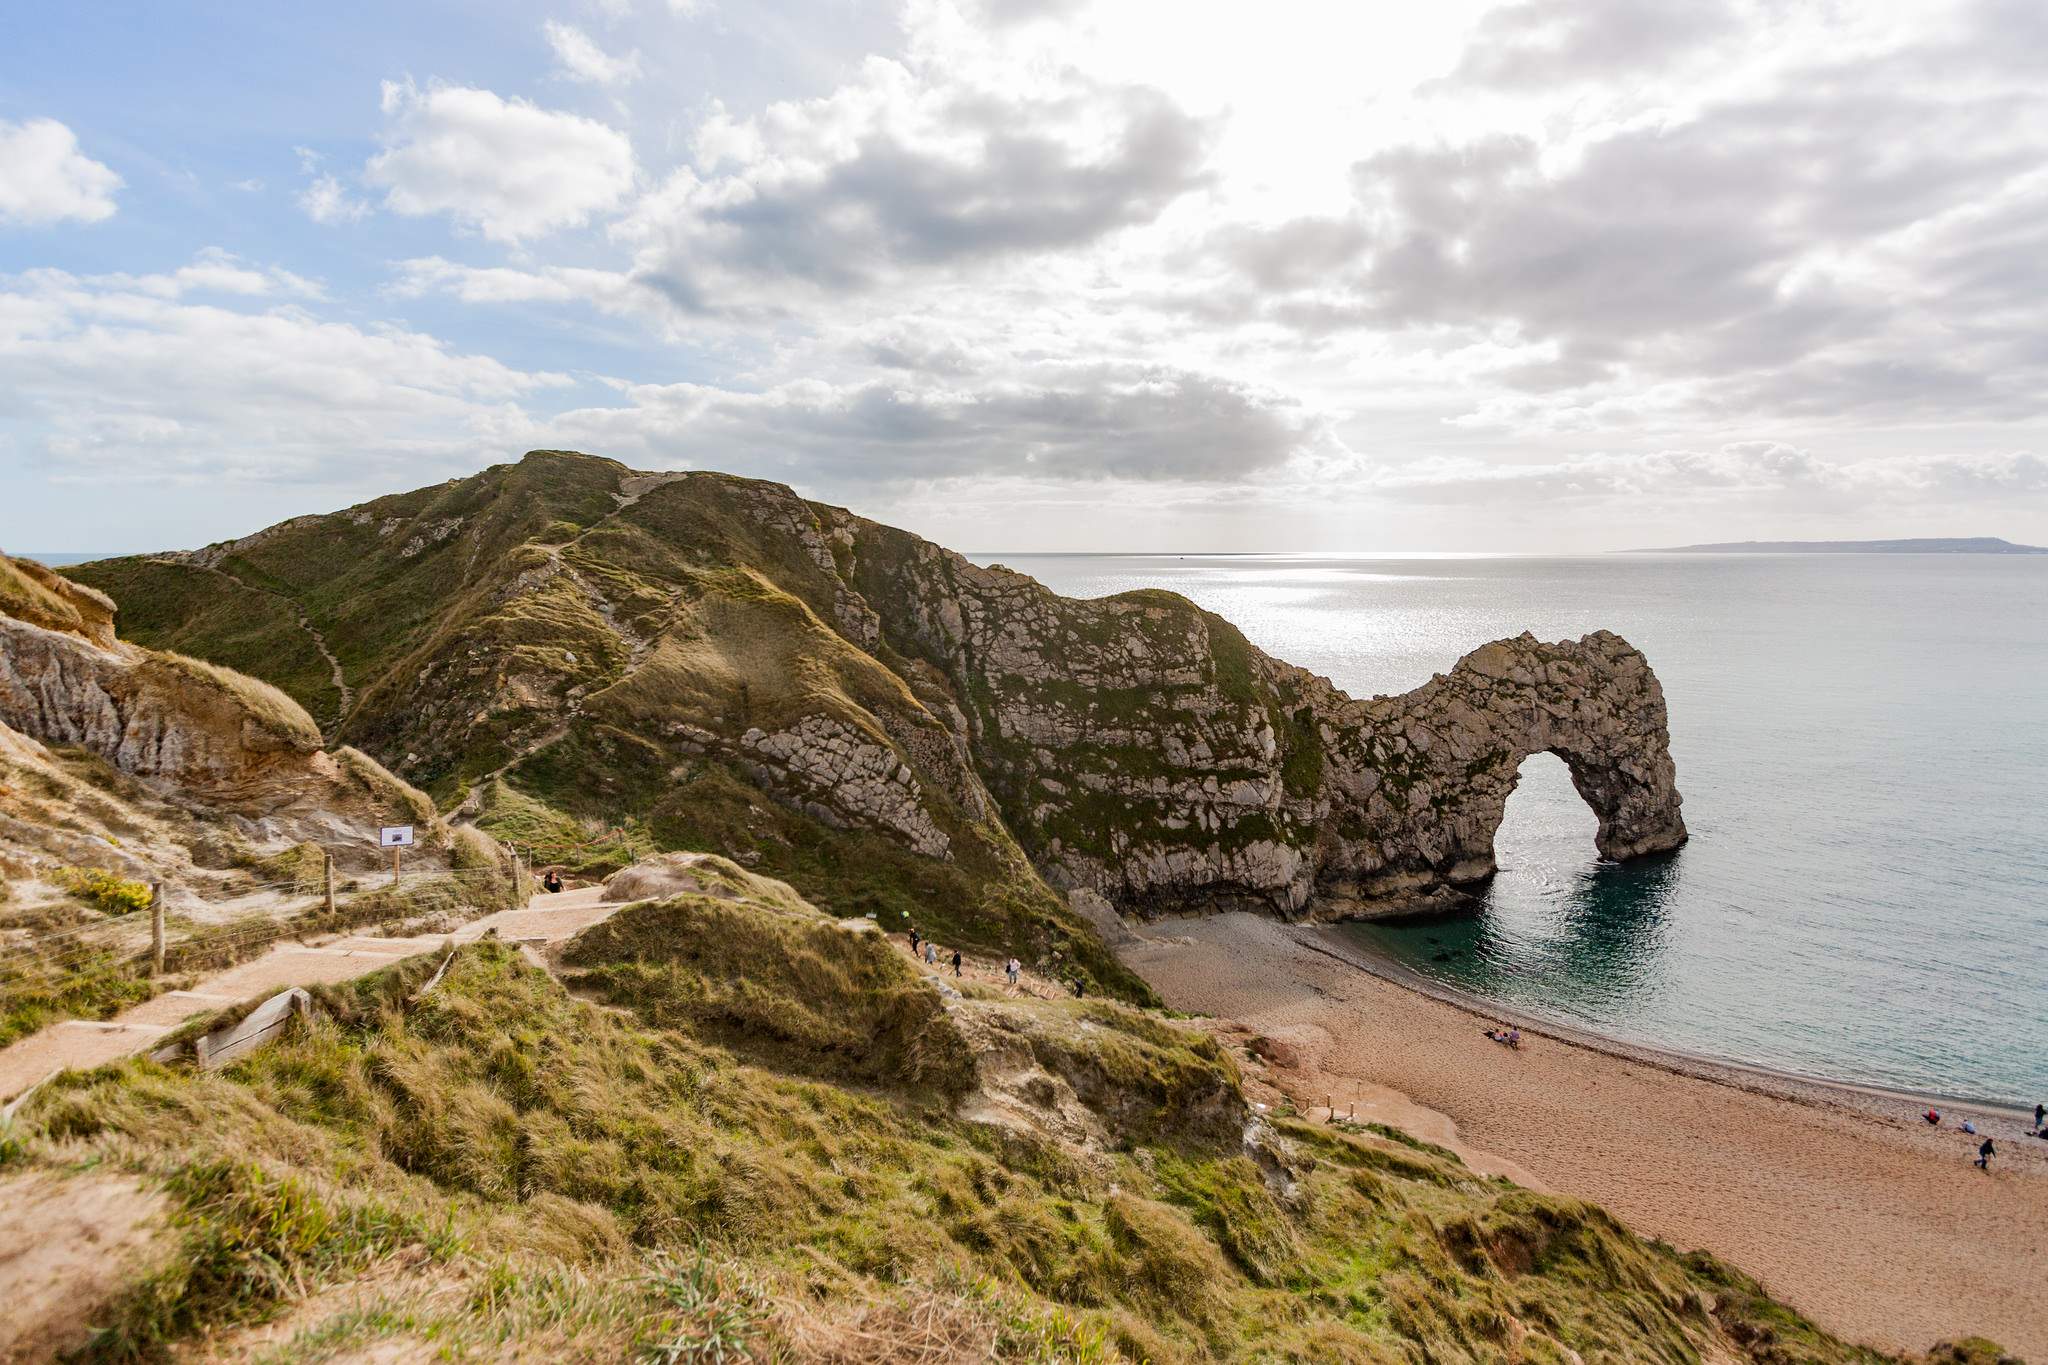 Once again, Durdle Door with path for accessing the beach